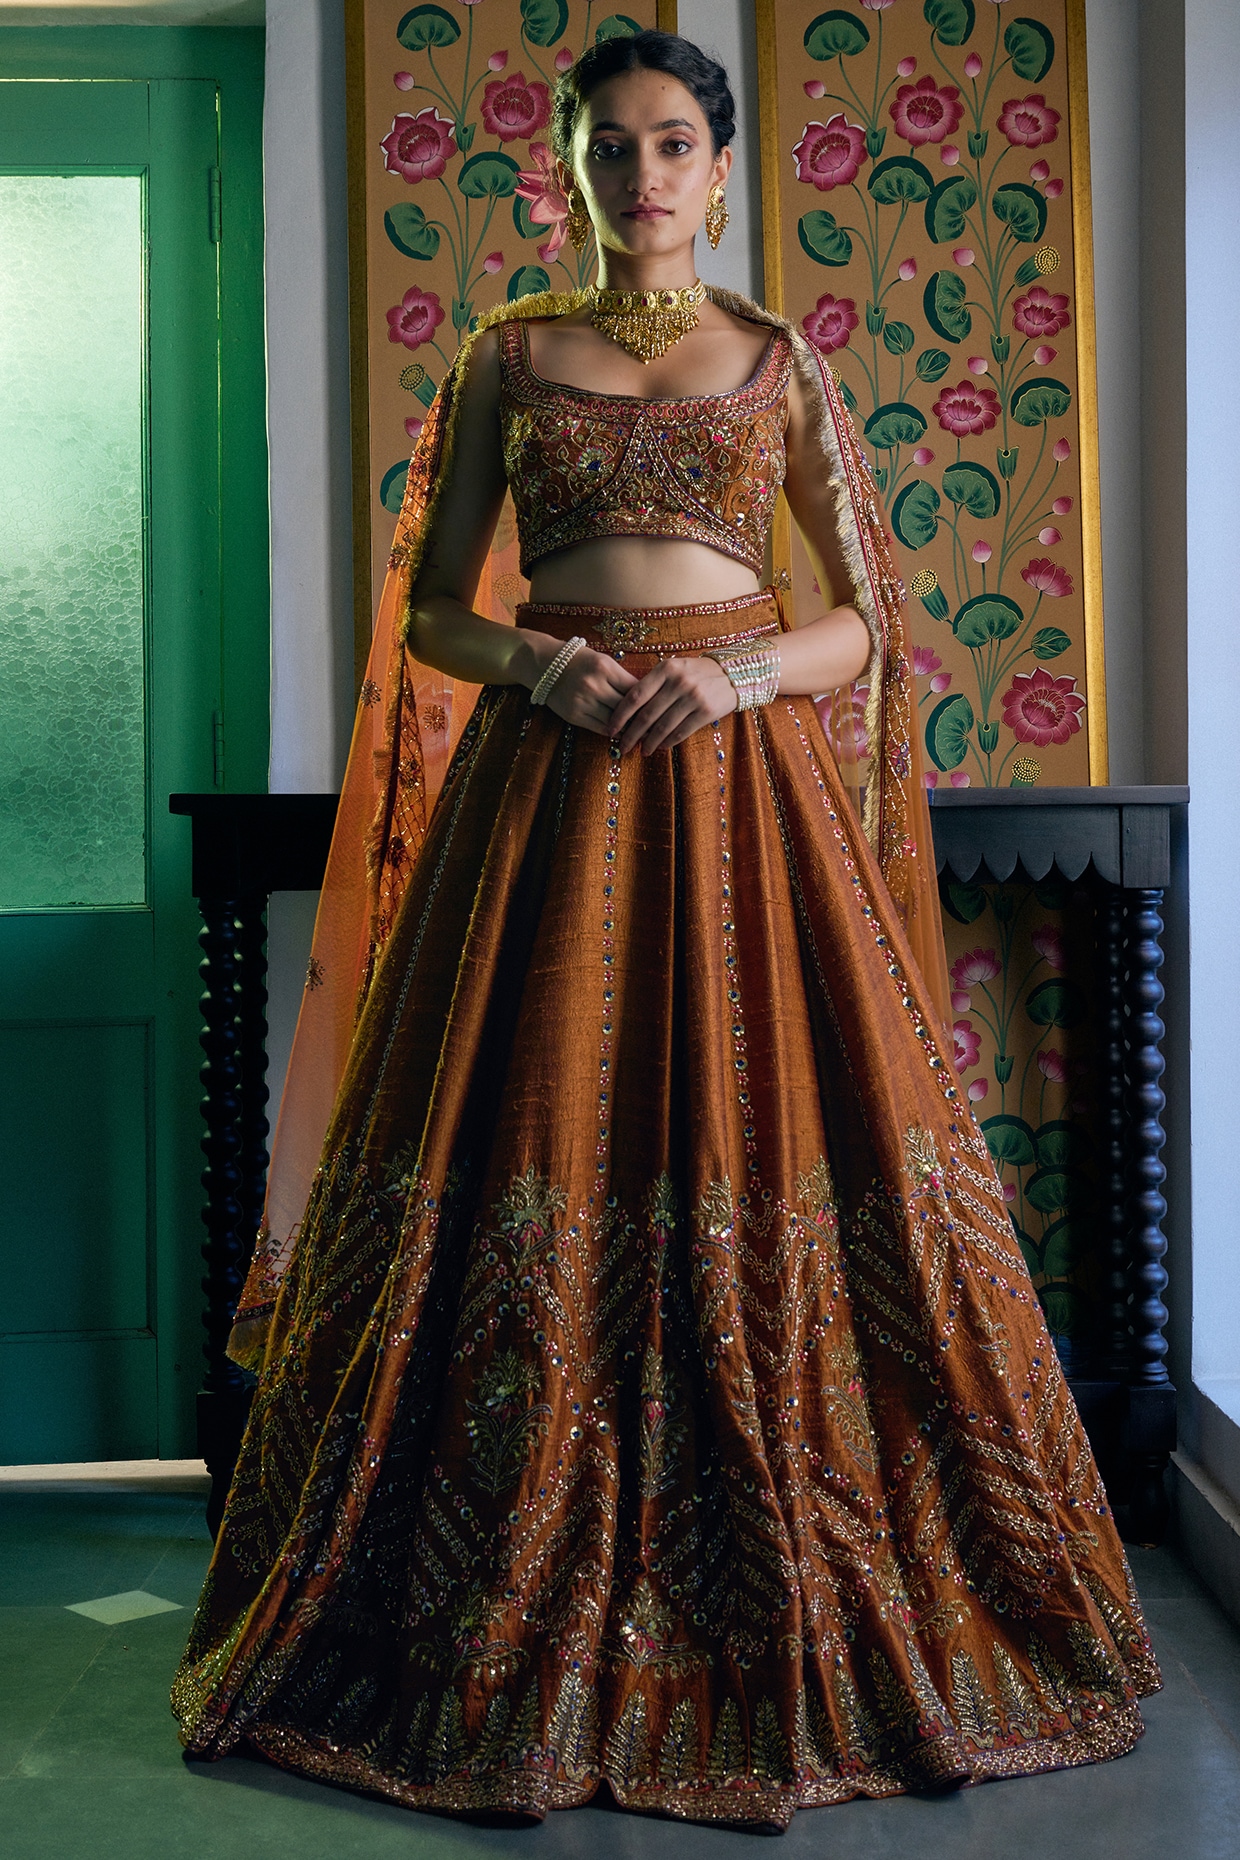 Mouni Roy's Lehenga With A Twist Is What Modern Indian Dressing Is All About